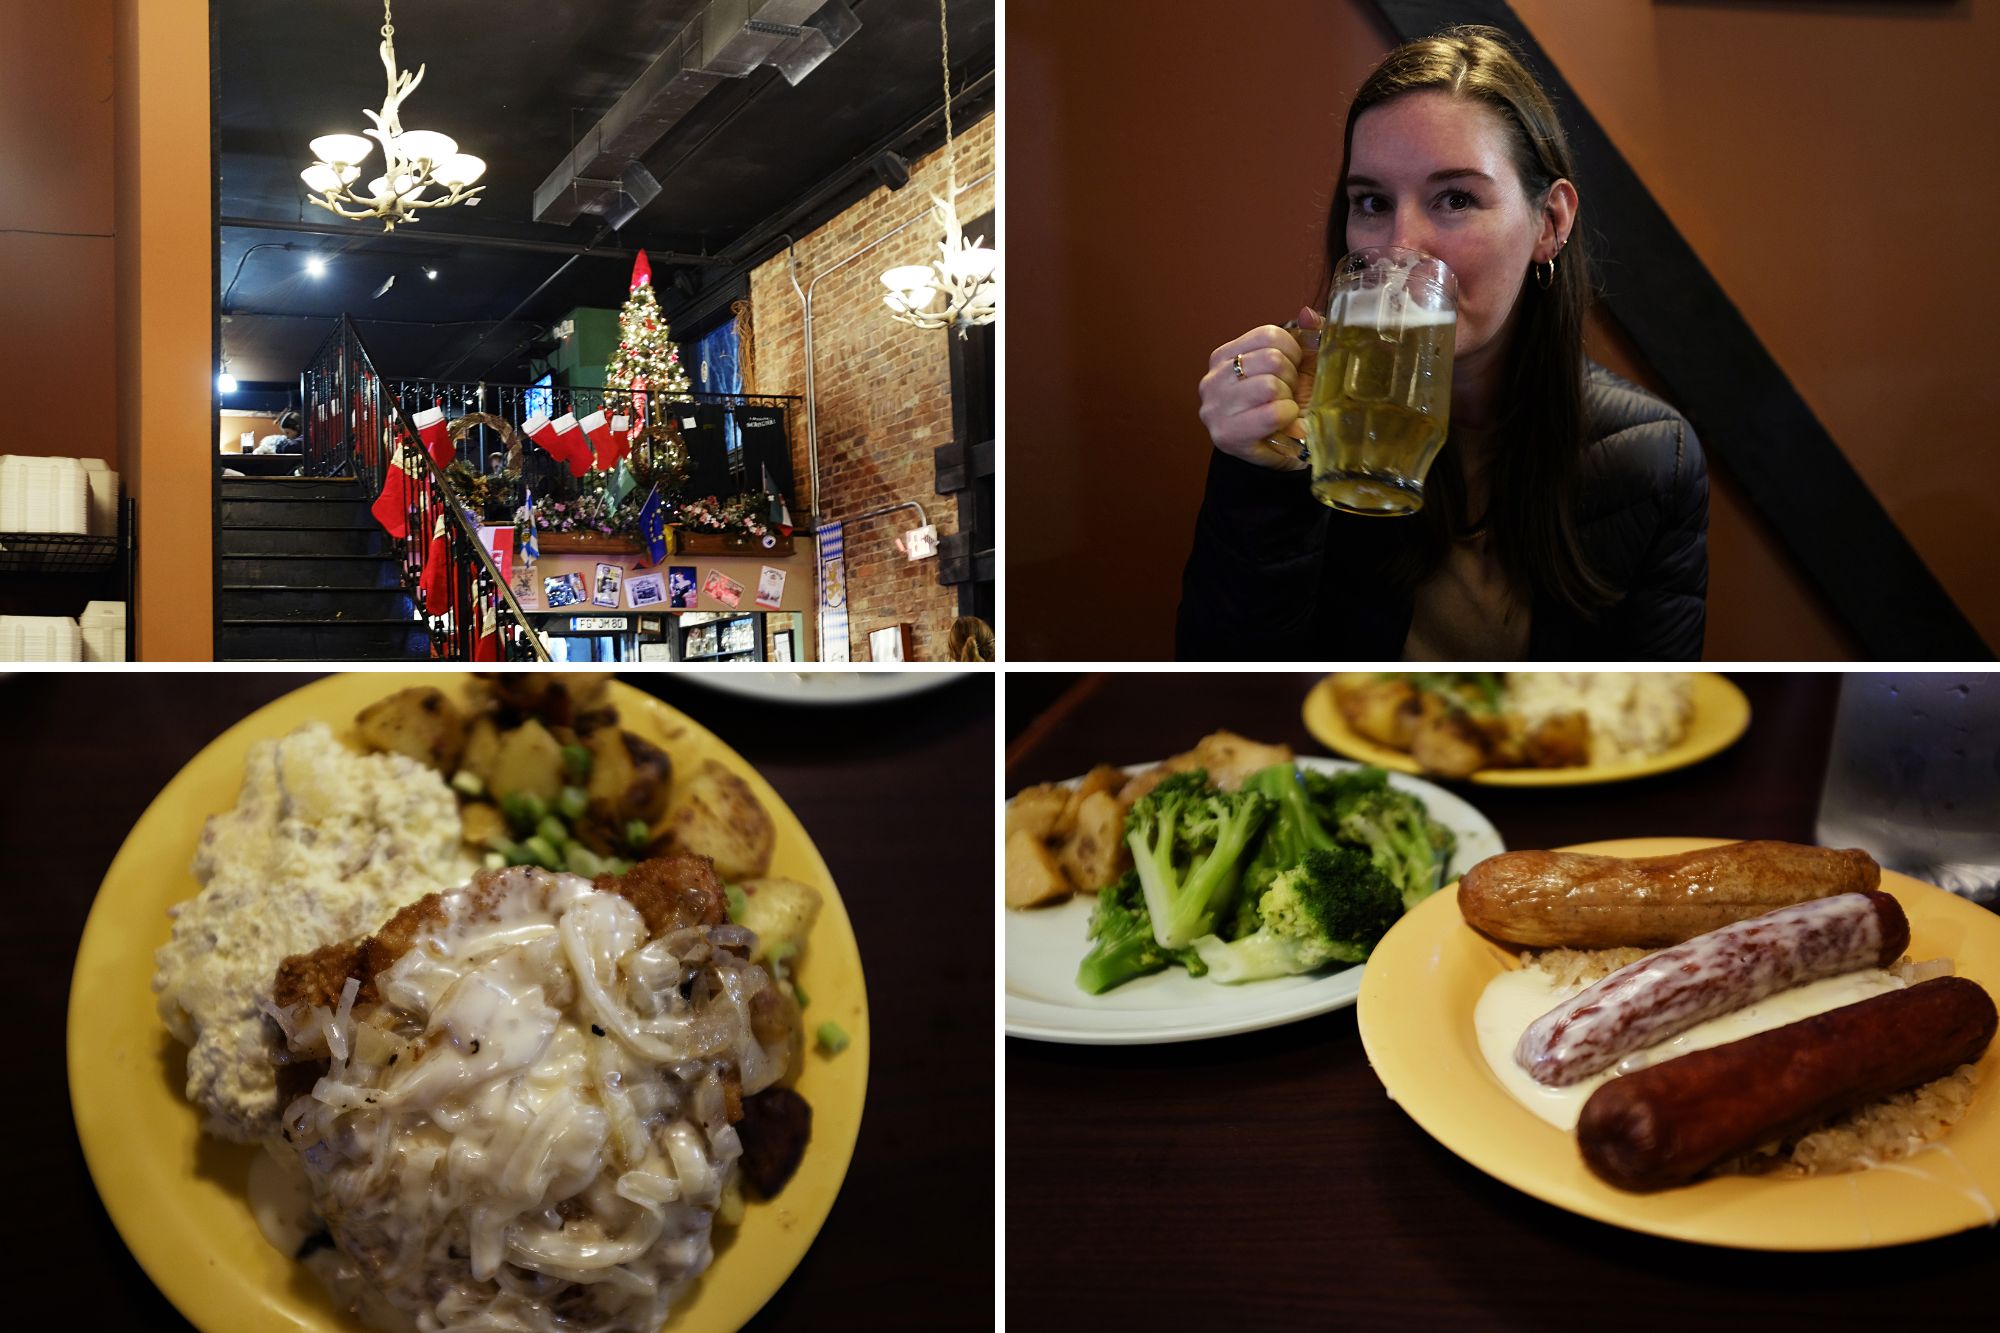 Collage of the interior of Freiberg's Restaurant, Alyssa drinking a beer, and the schnitzel and bratwursts